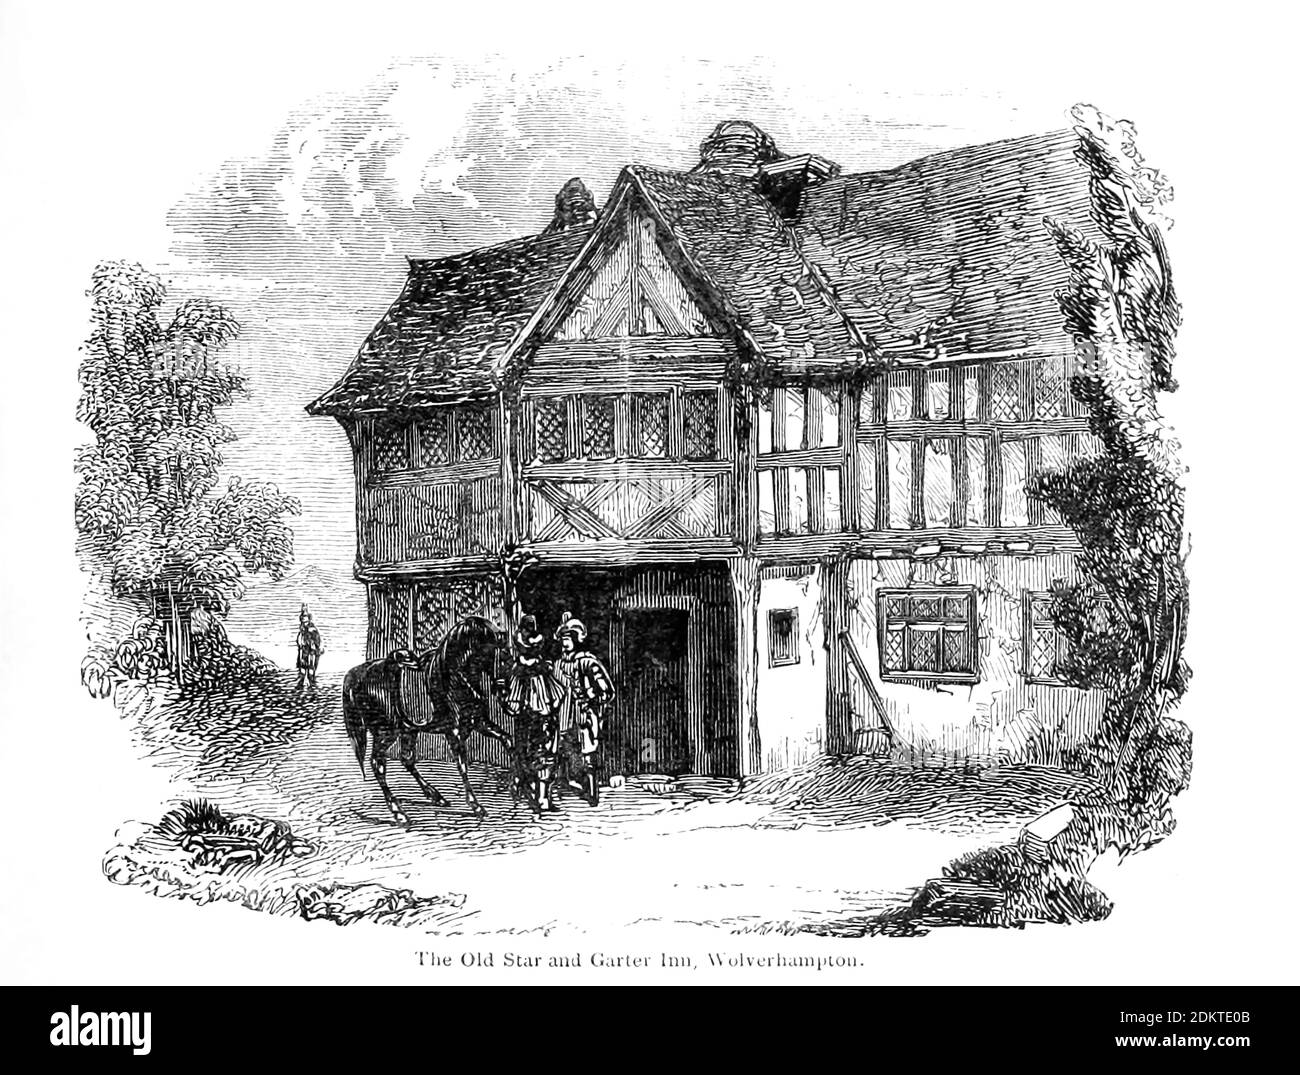 The Old Star and Garter Inn, Wolverhampton From the book The wanderings of a pen and pencil by Palmer, F. P. (Francis Paul); Illustrated by Crowquill, Alfred, [Alfred Henry Forrester]  Published in London by Jeremiah How in 1846 Stock Photo